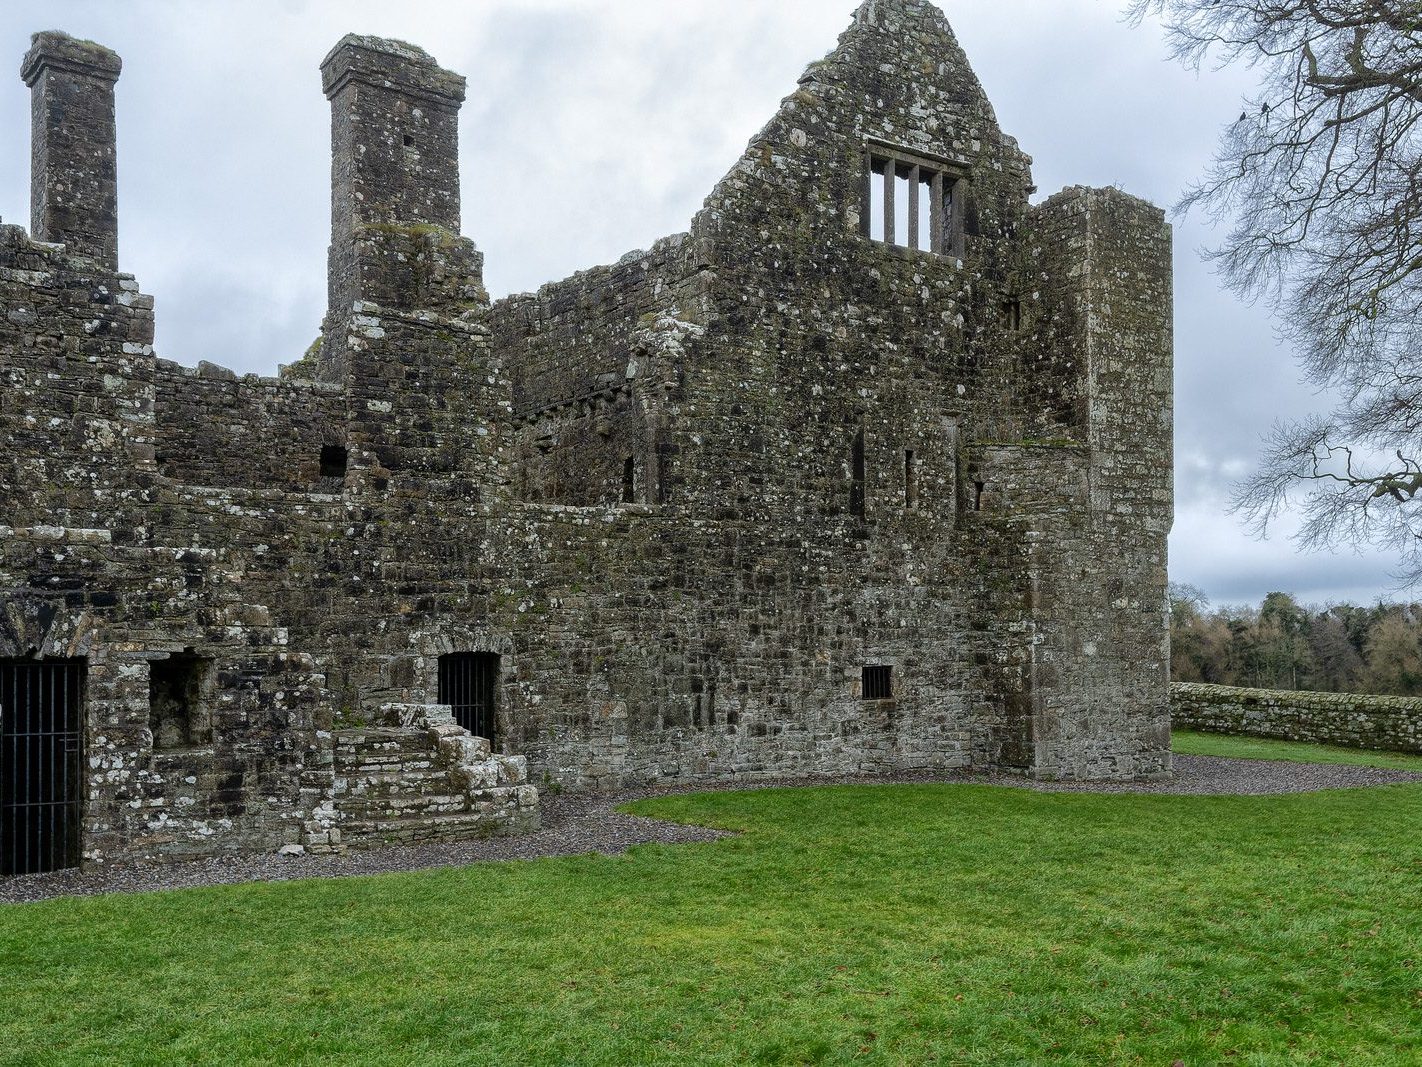 BECTIVE ABBEY WHICH I VISITED LAST CHRISTMAS [THERE WERE NO OTHER VISITORS AS IT WAS A VERY WET DAY]--225211-1